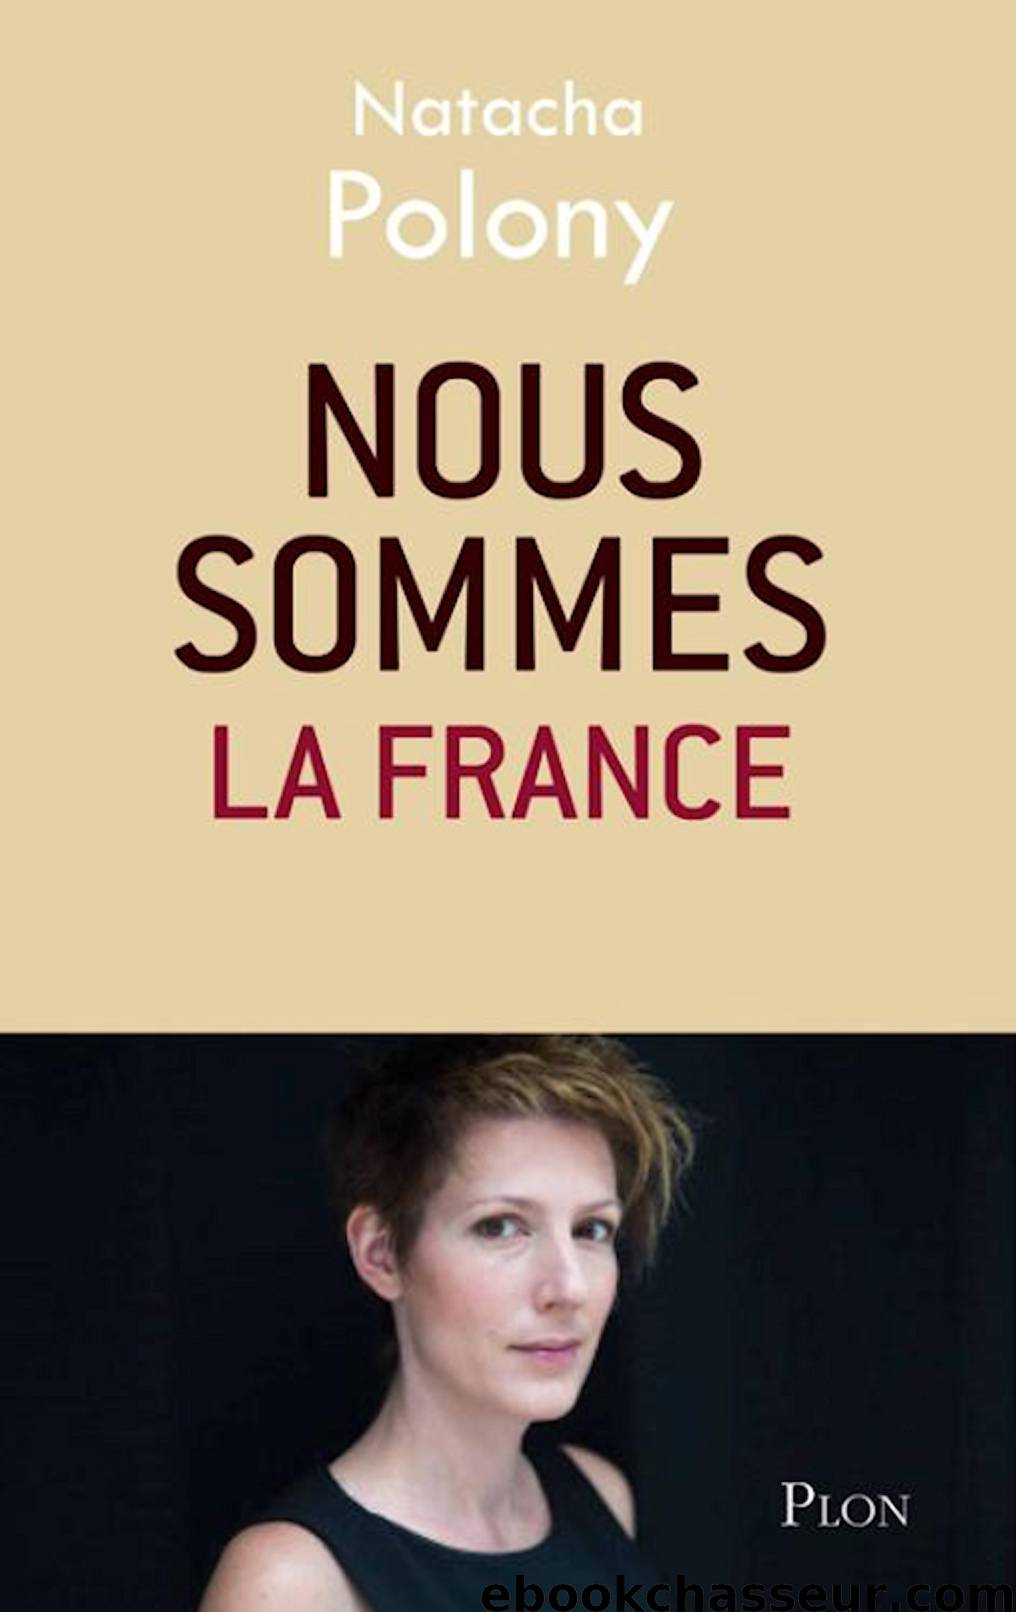 Nous sommes la France (French Edition) by Natacha POLONY